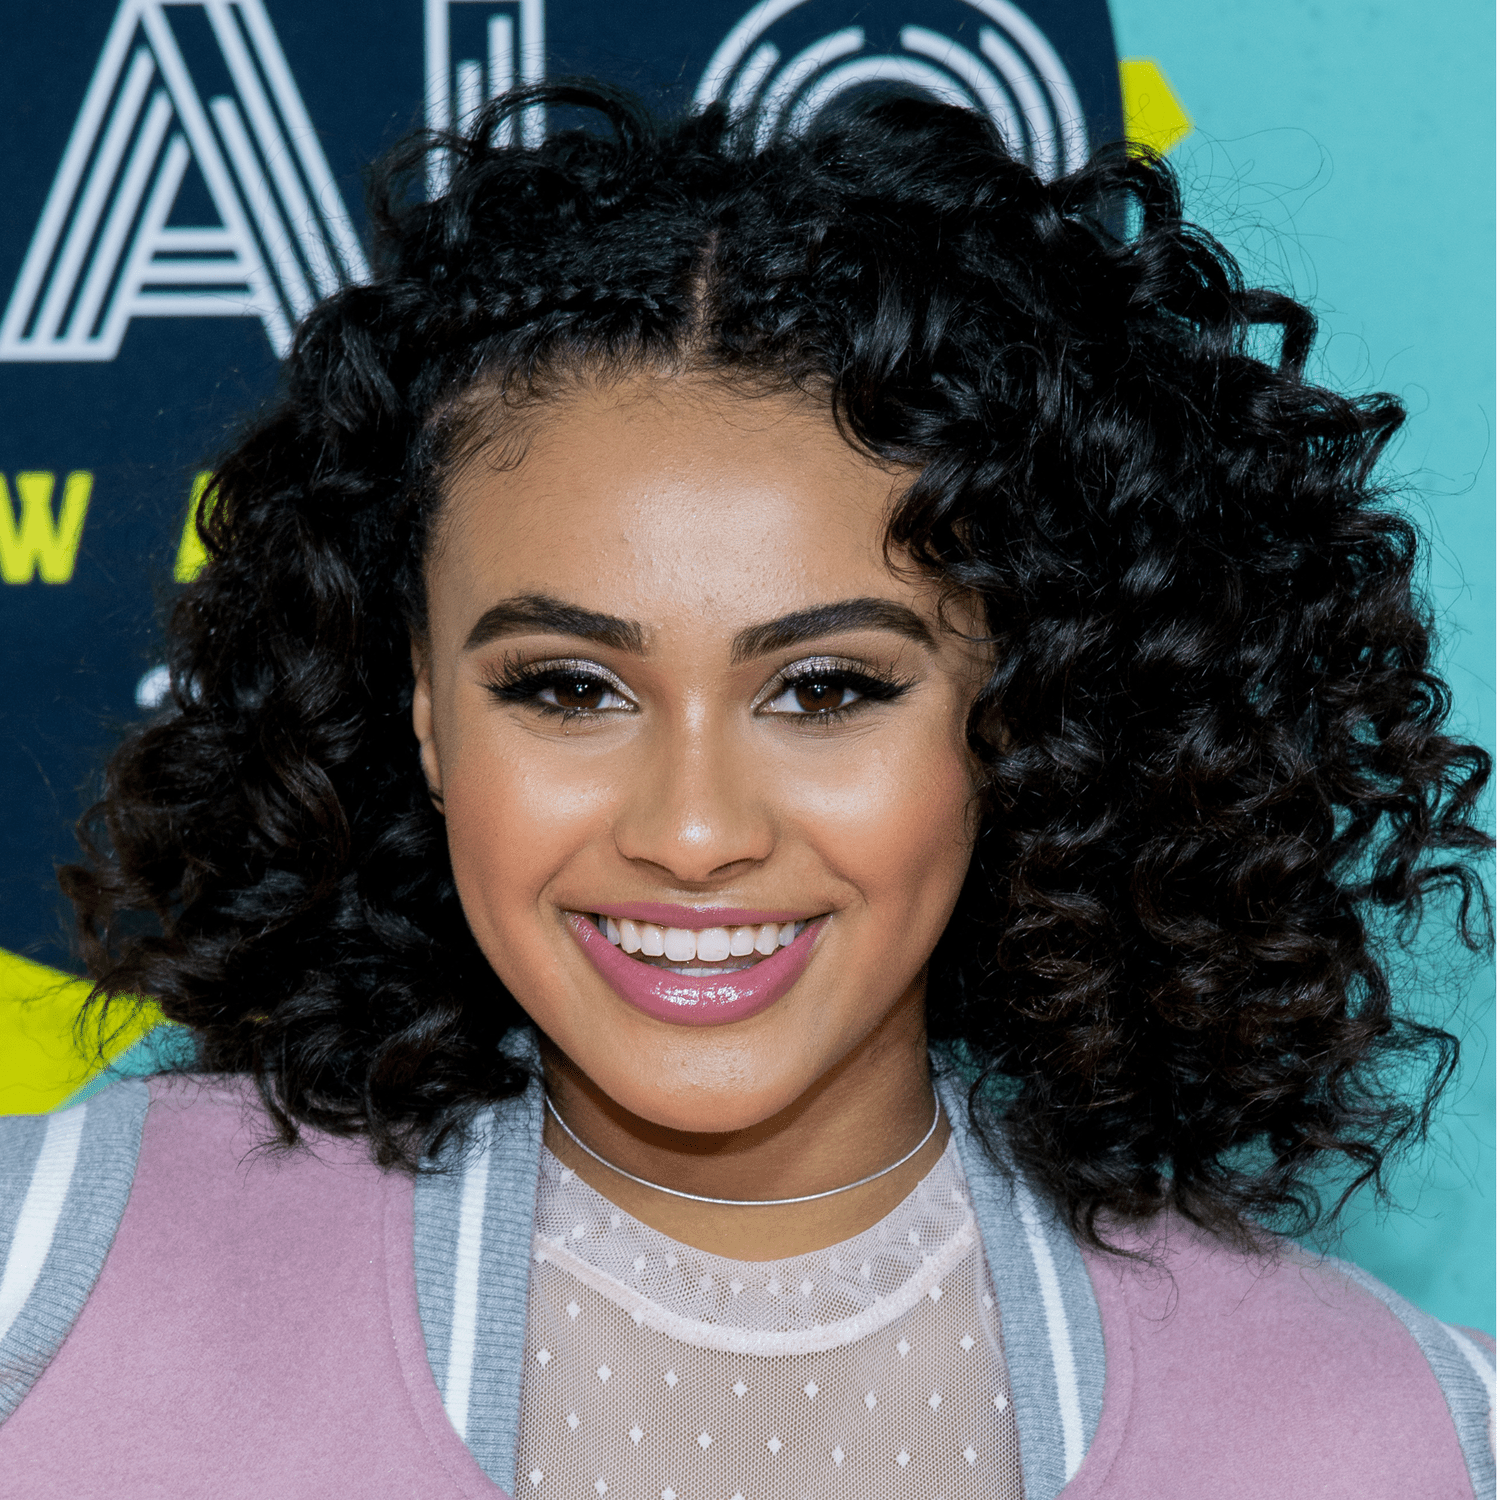 Daniella Perkins wearing curly bob with cornrows hairstyle